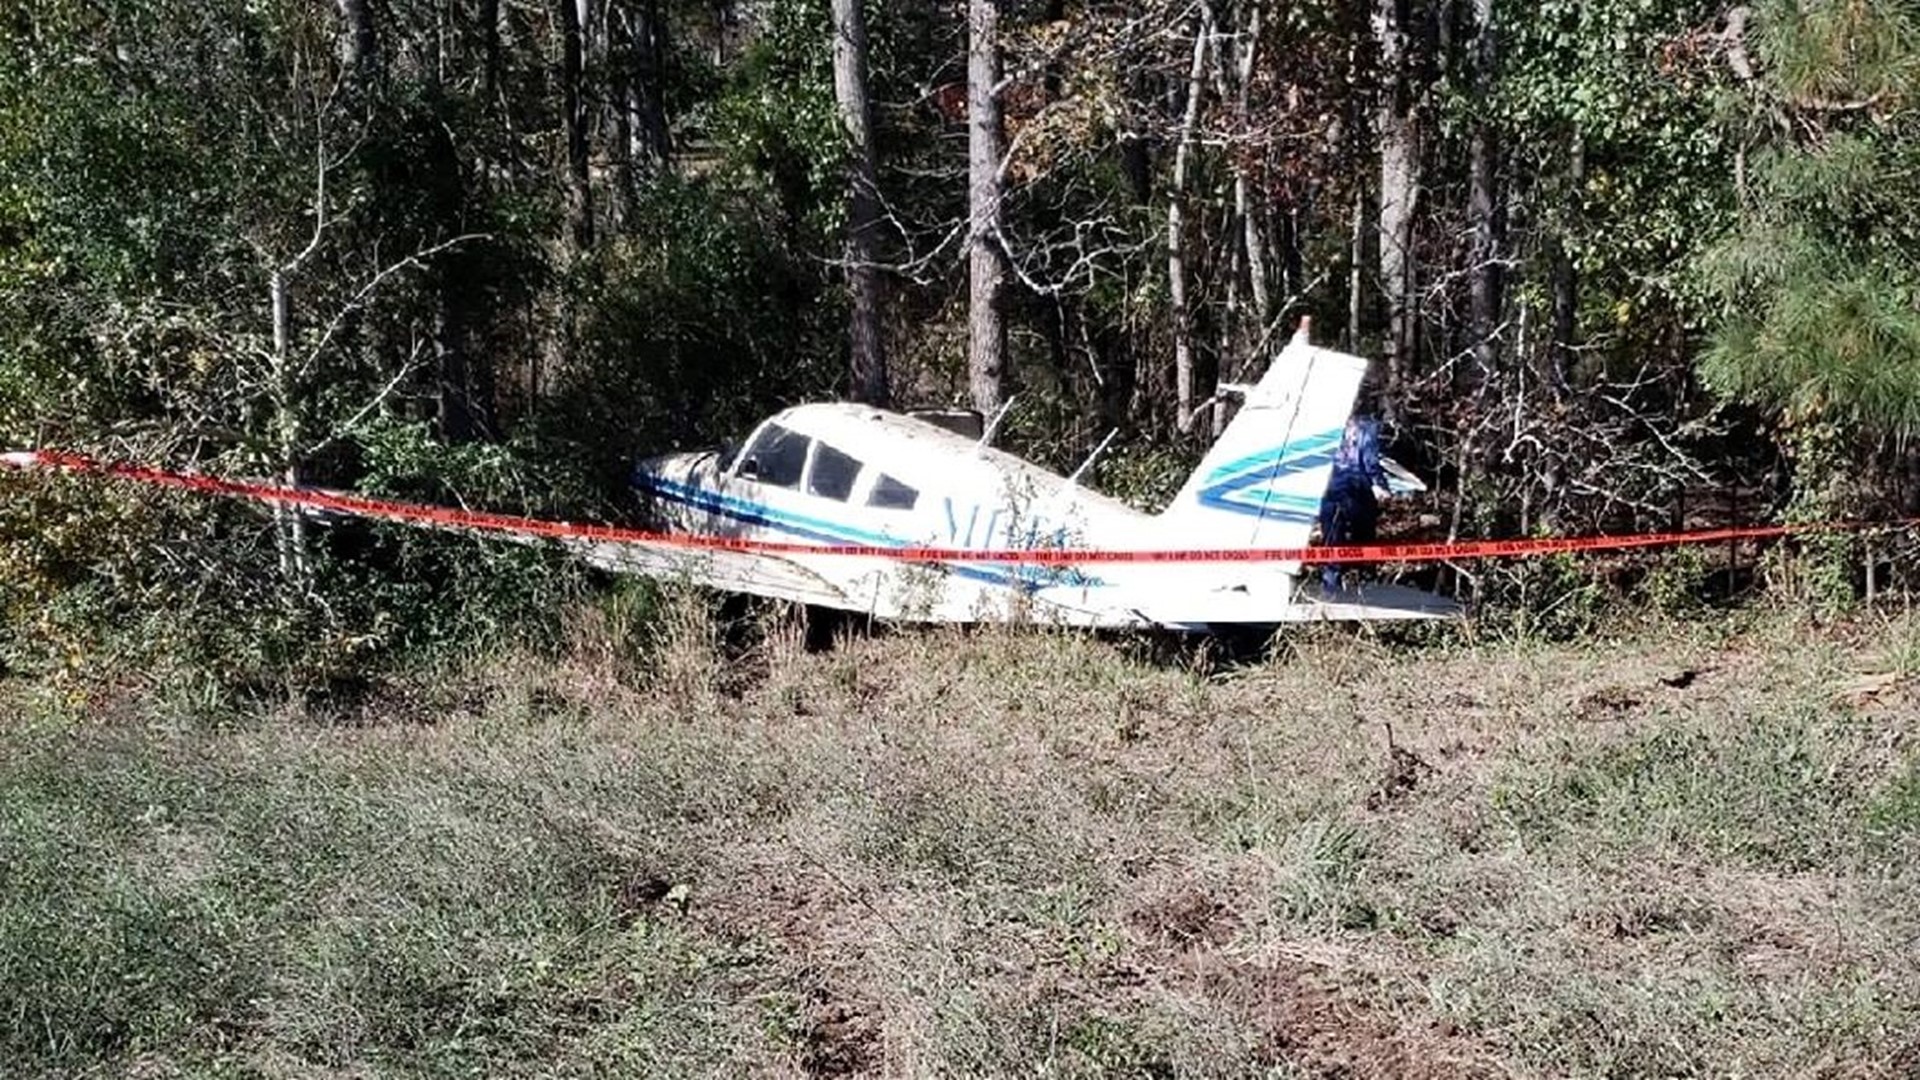 Four recovering after plane crash in central